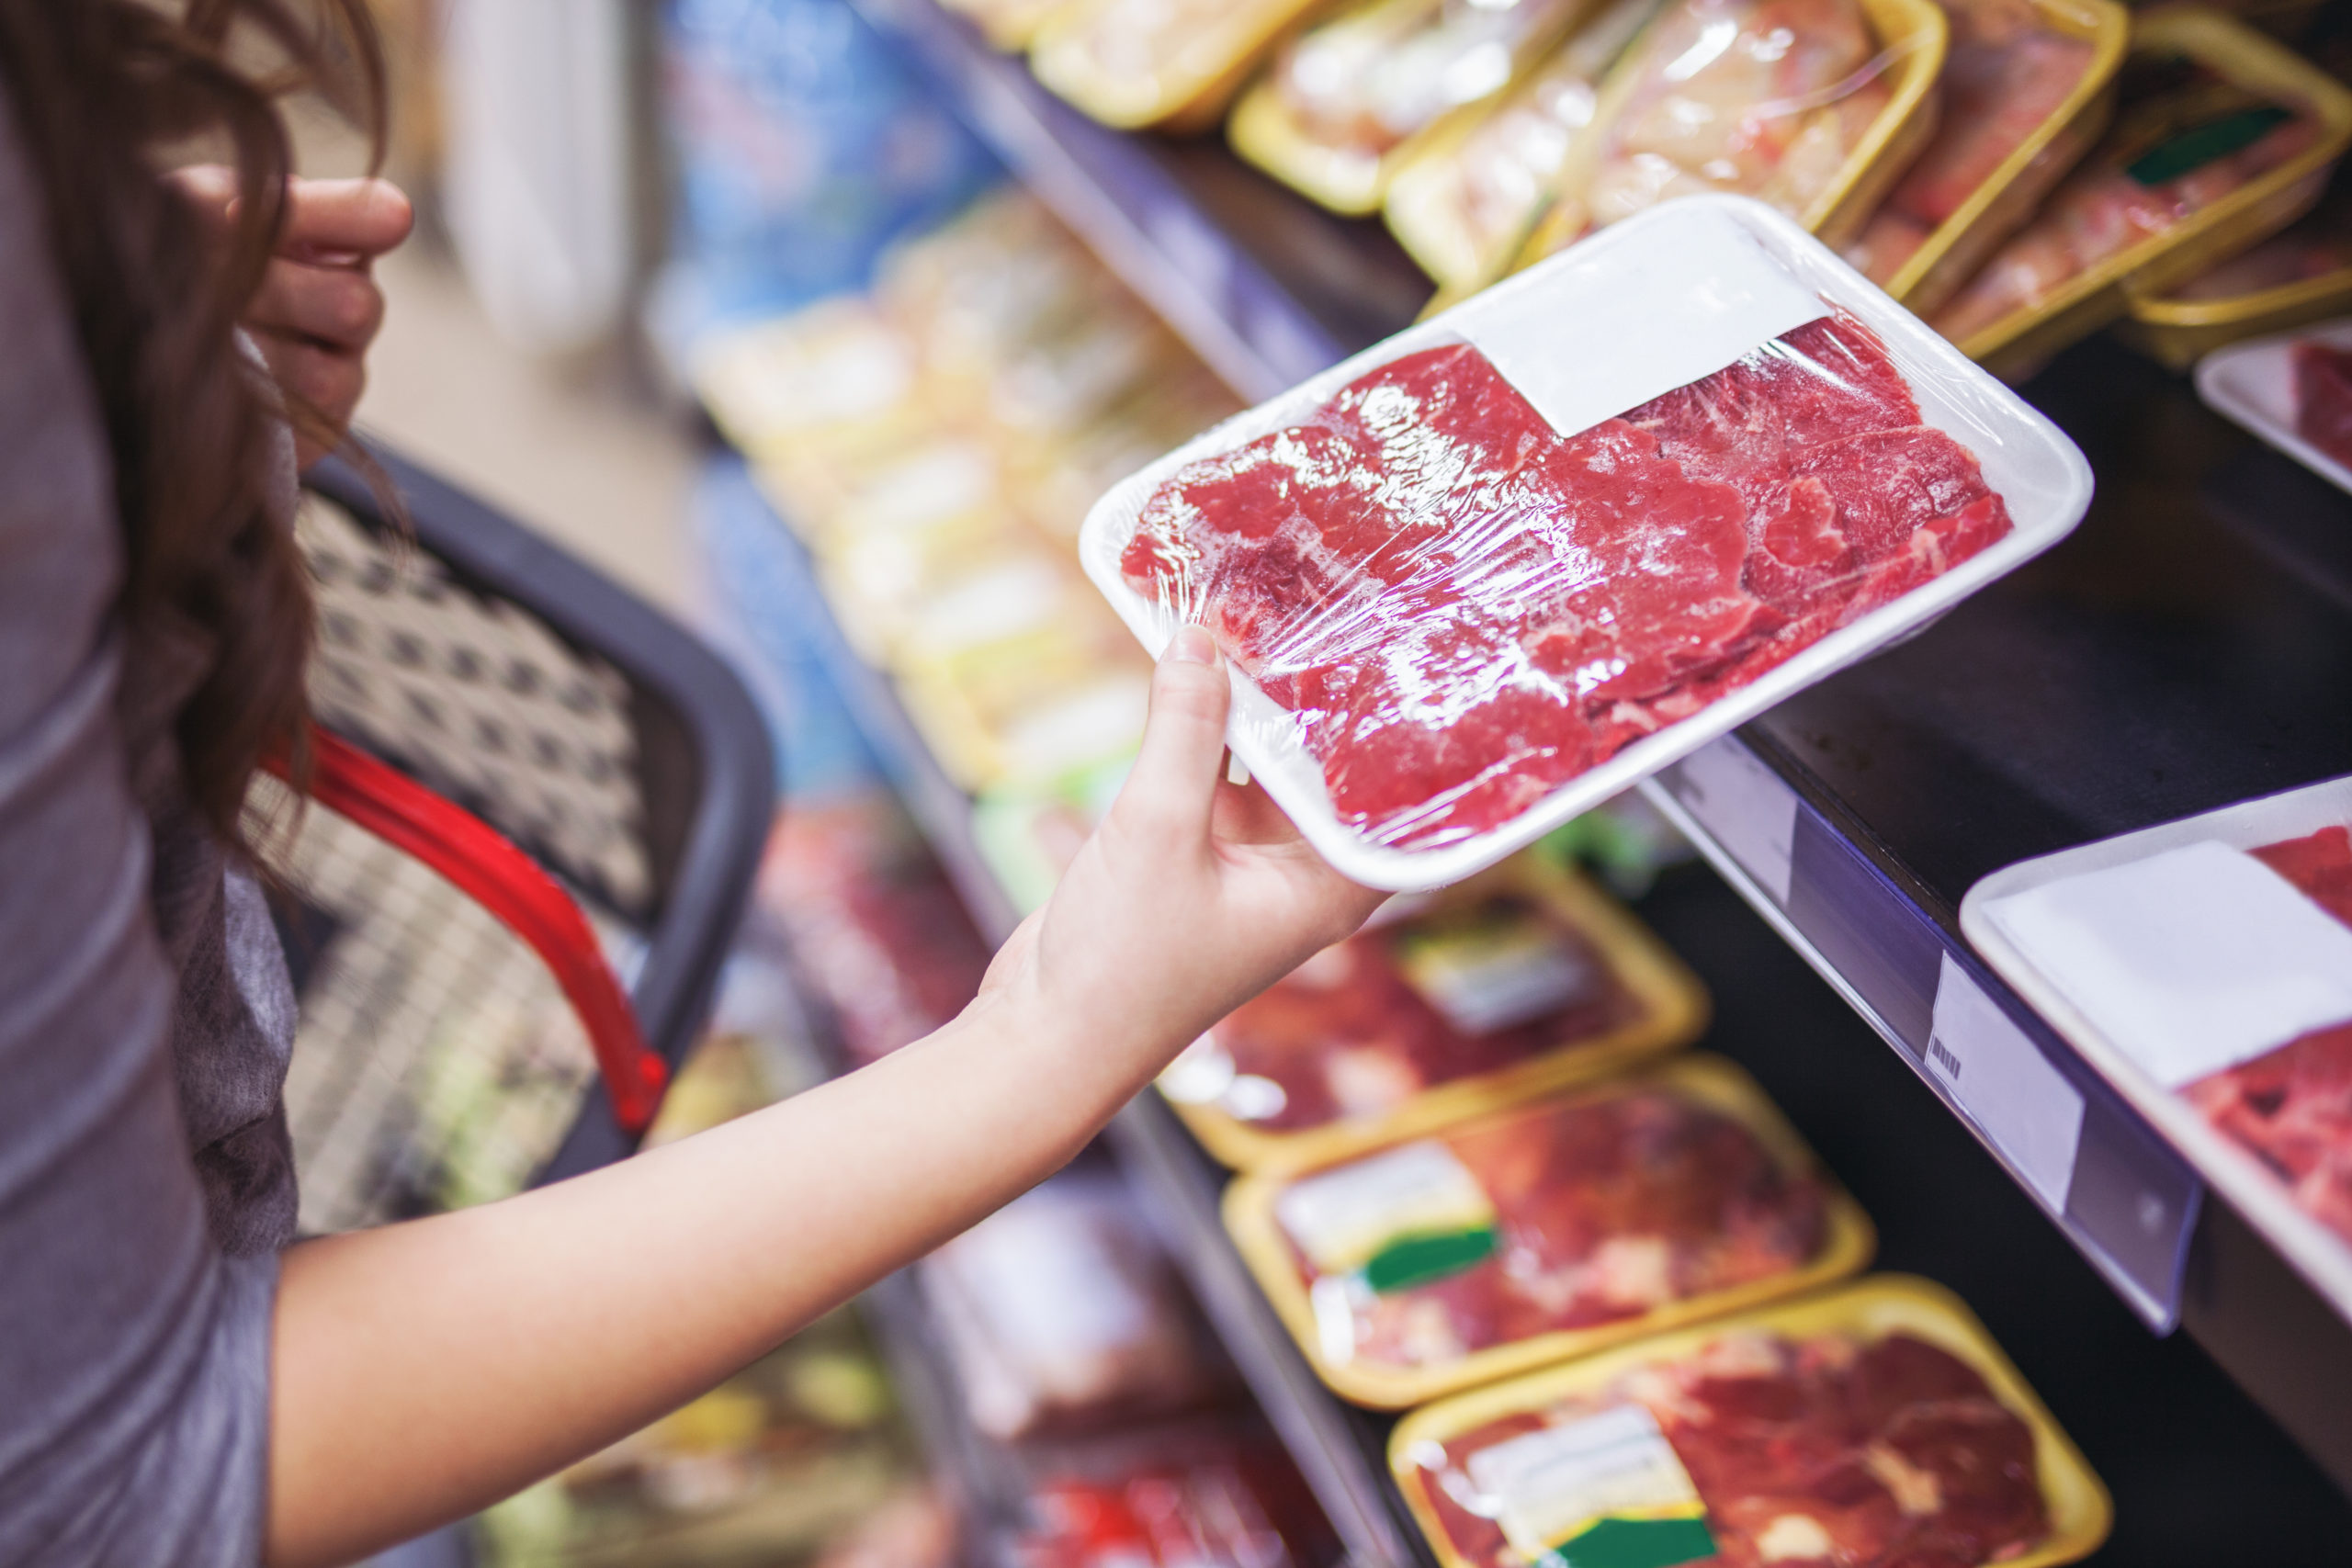 Why Canadians are walking away from the meat counter 